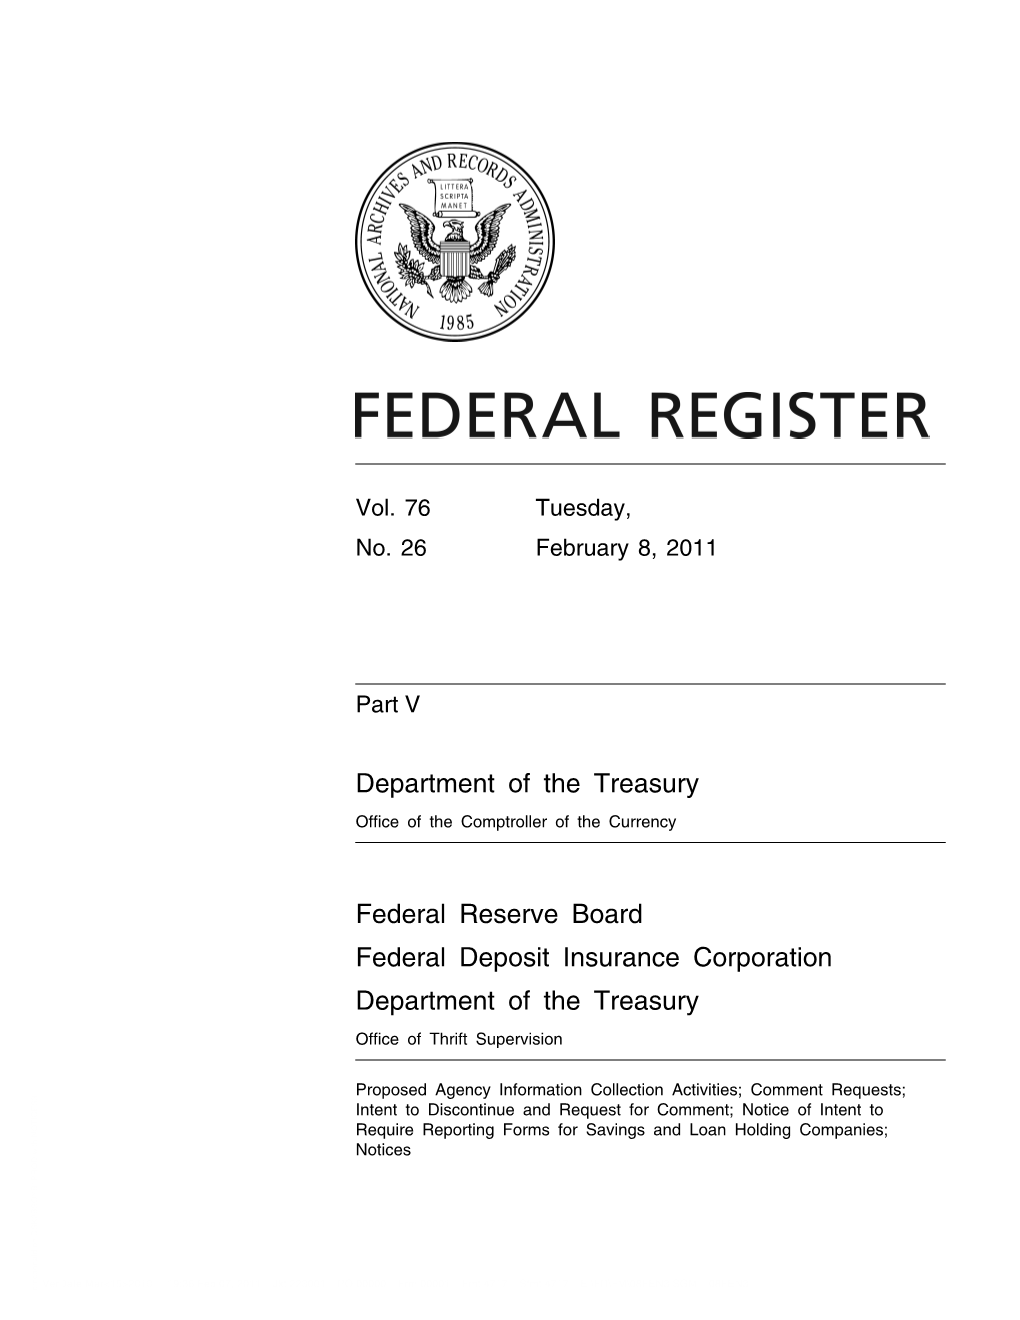 Department of the Treasury Federal Reserve Board Federal